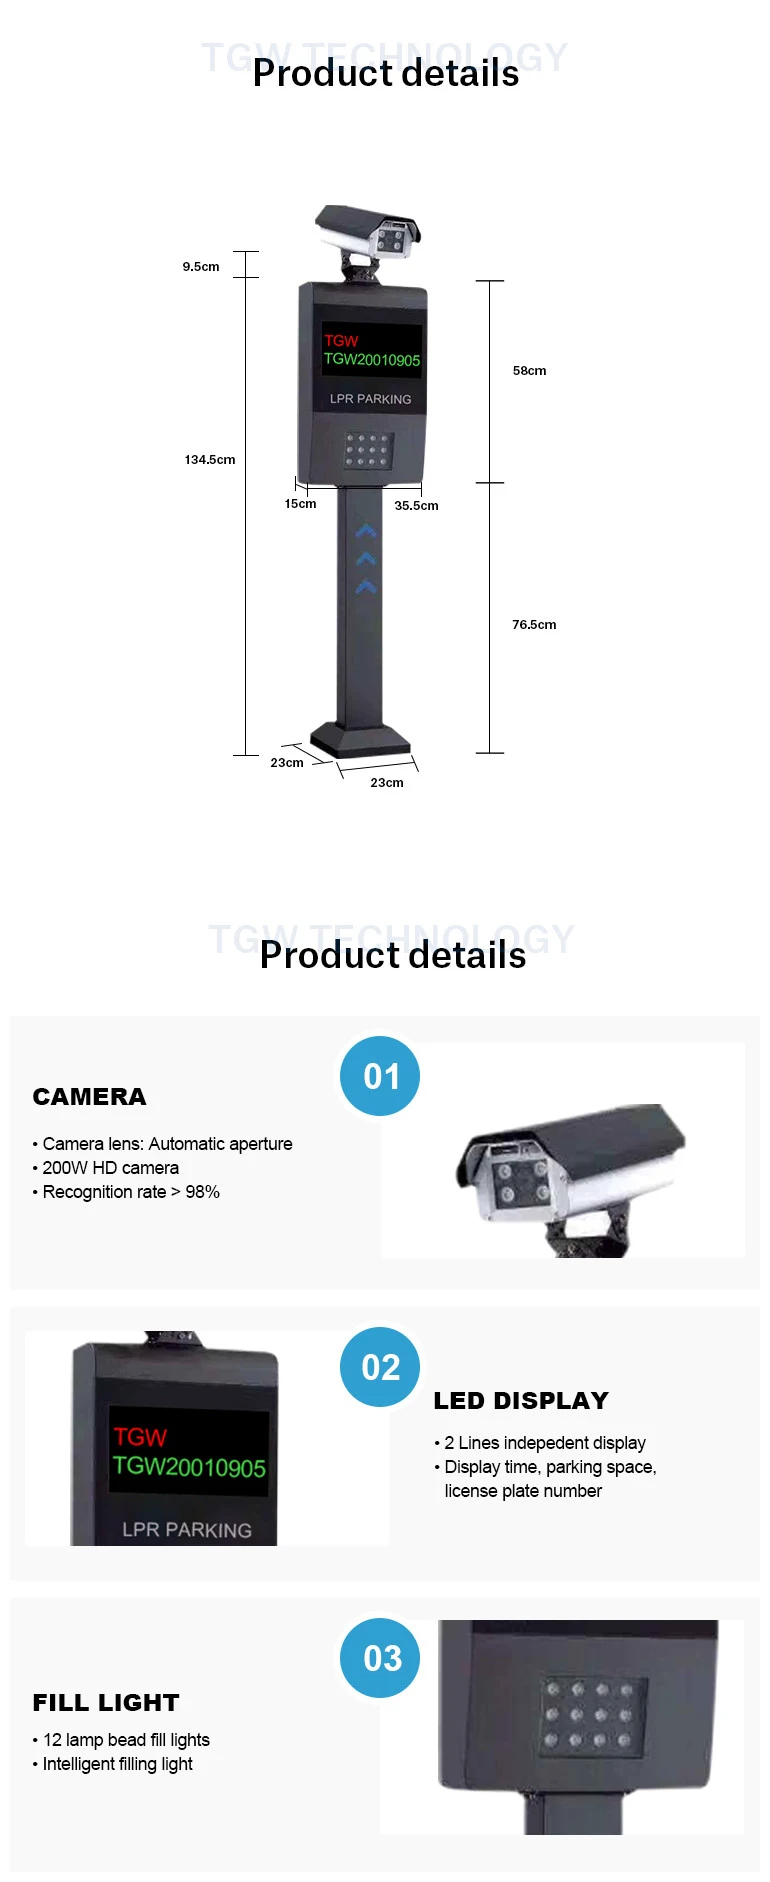 Camera Smart Parking System Price Lpr Parking Access Control System